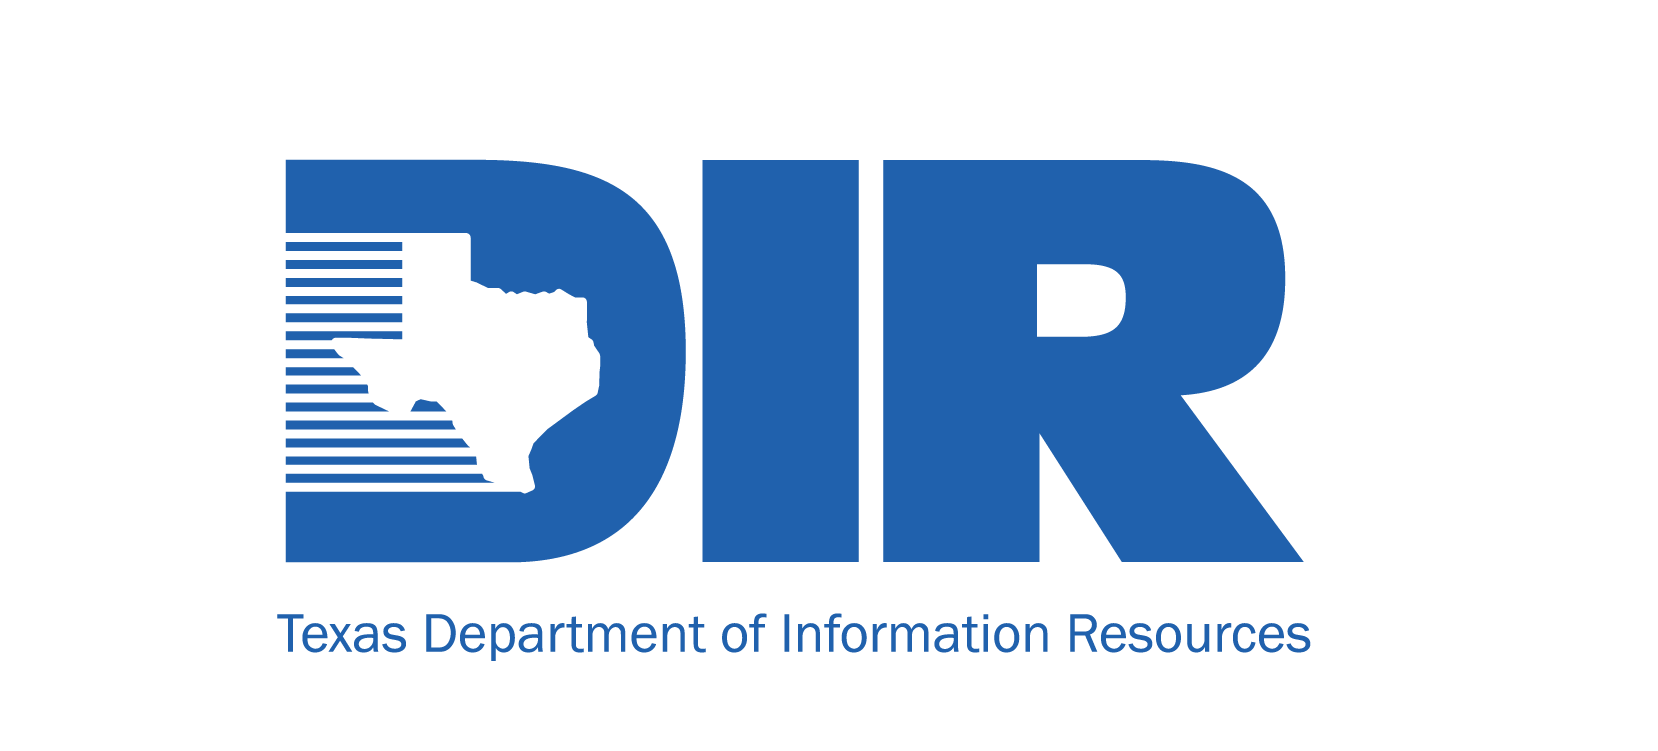 Division of information resources logo